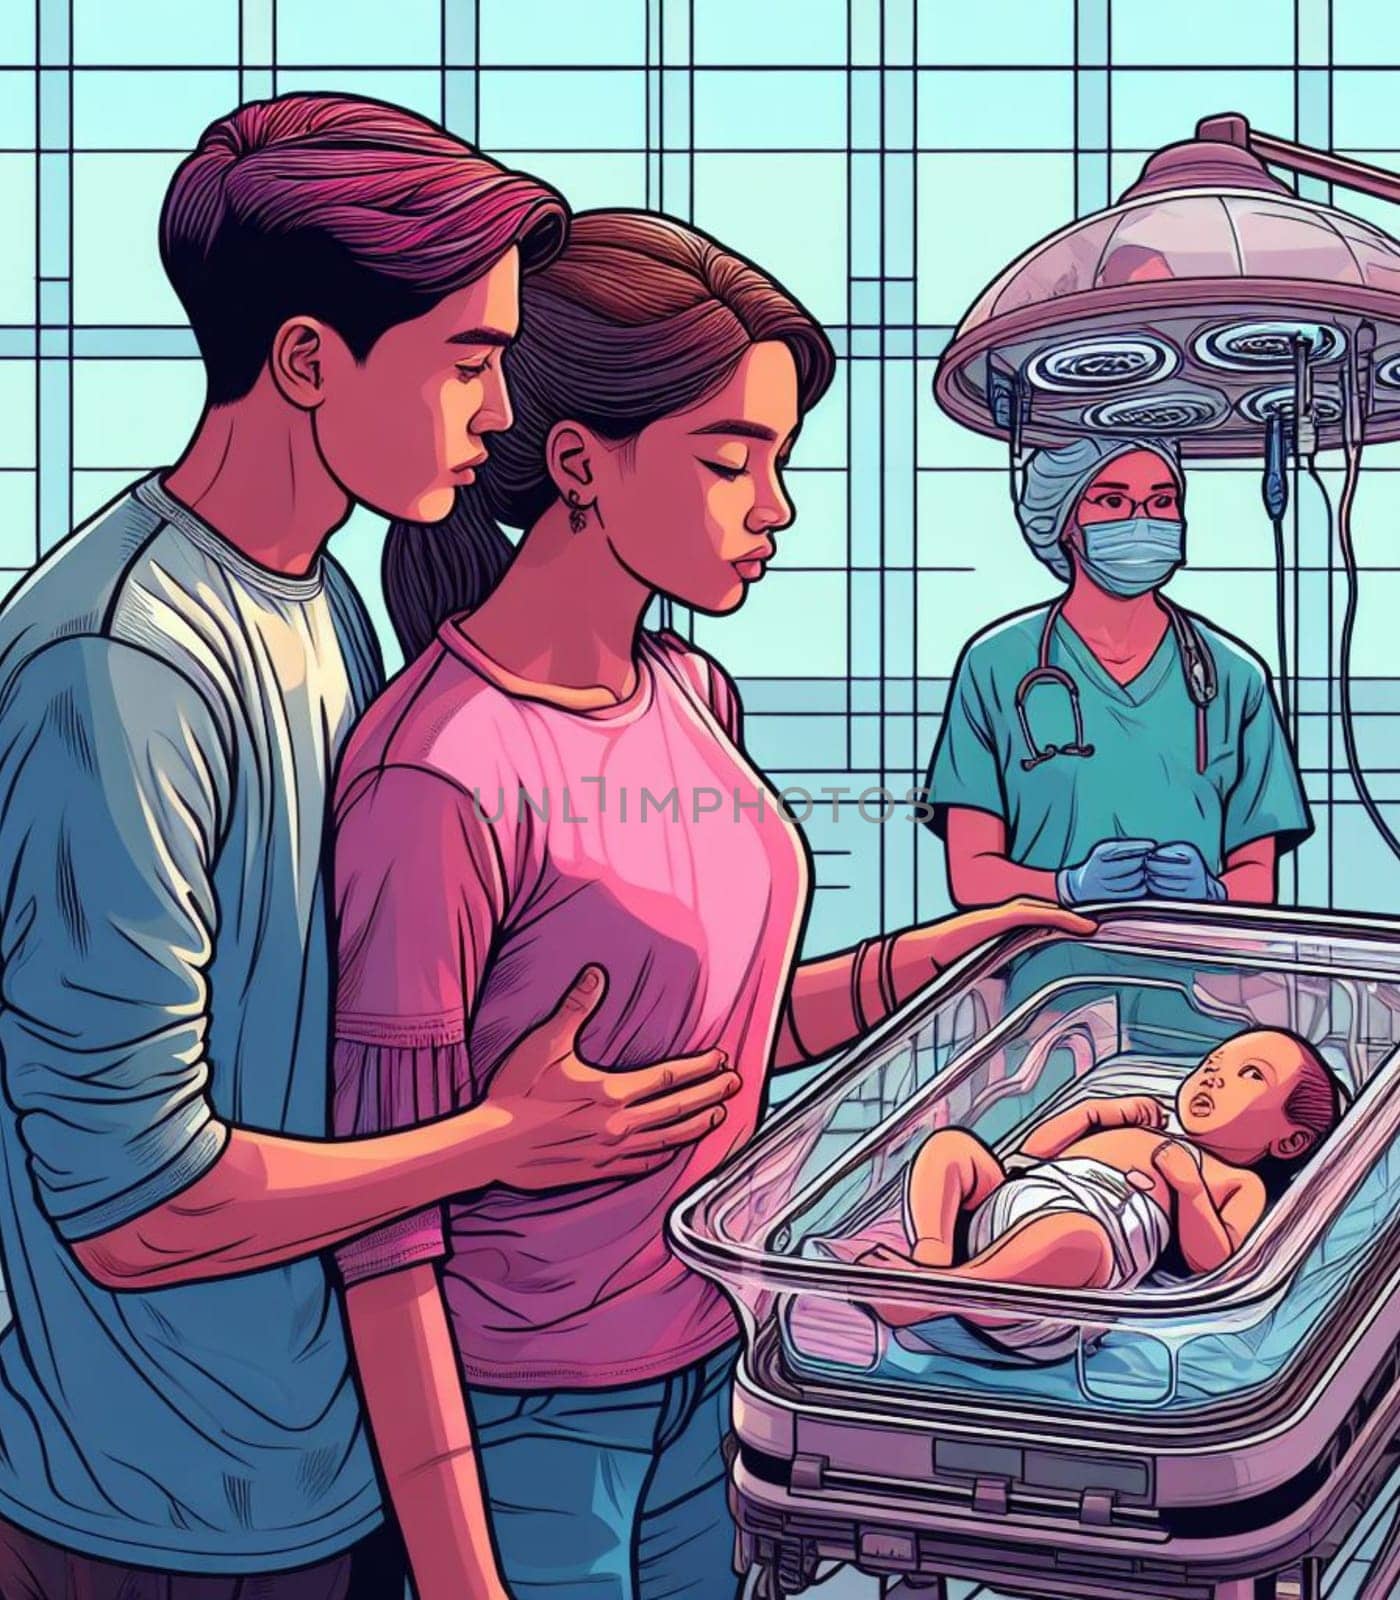 illustration depicting medical staff people at the hospital take care of newborn baby ai generated